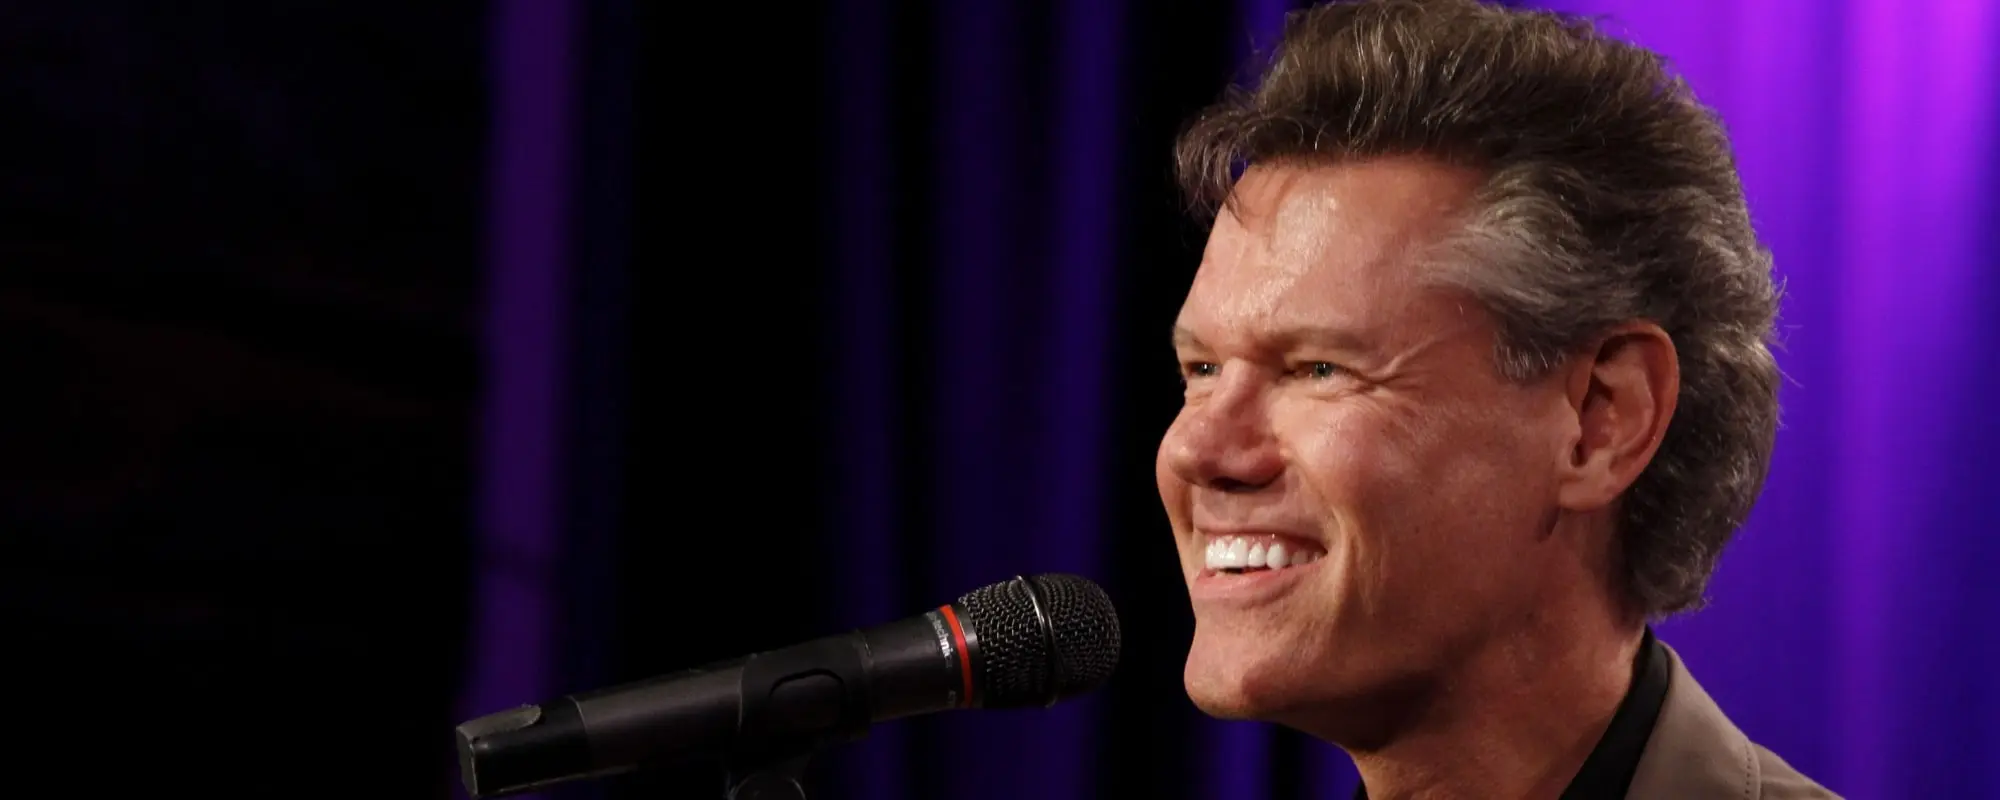 How Randy Travis and His Team Used AI to Create “More Where That Came From”